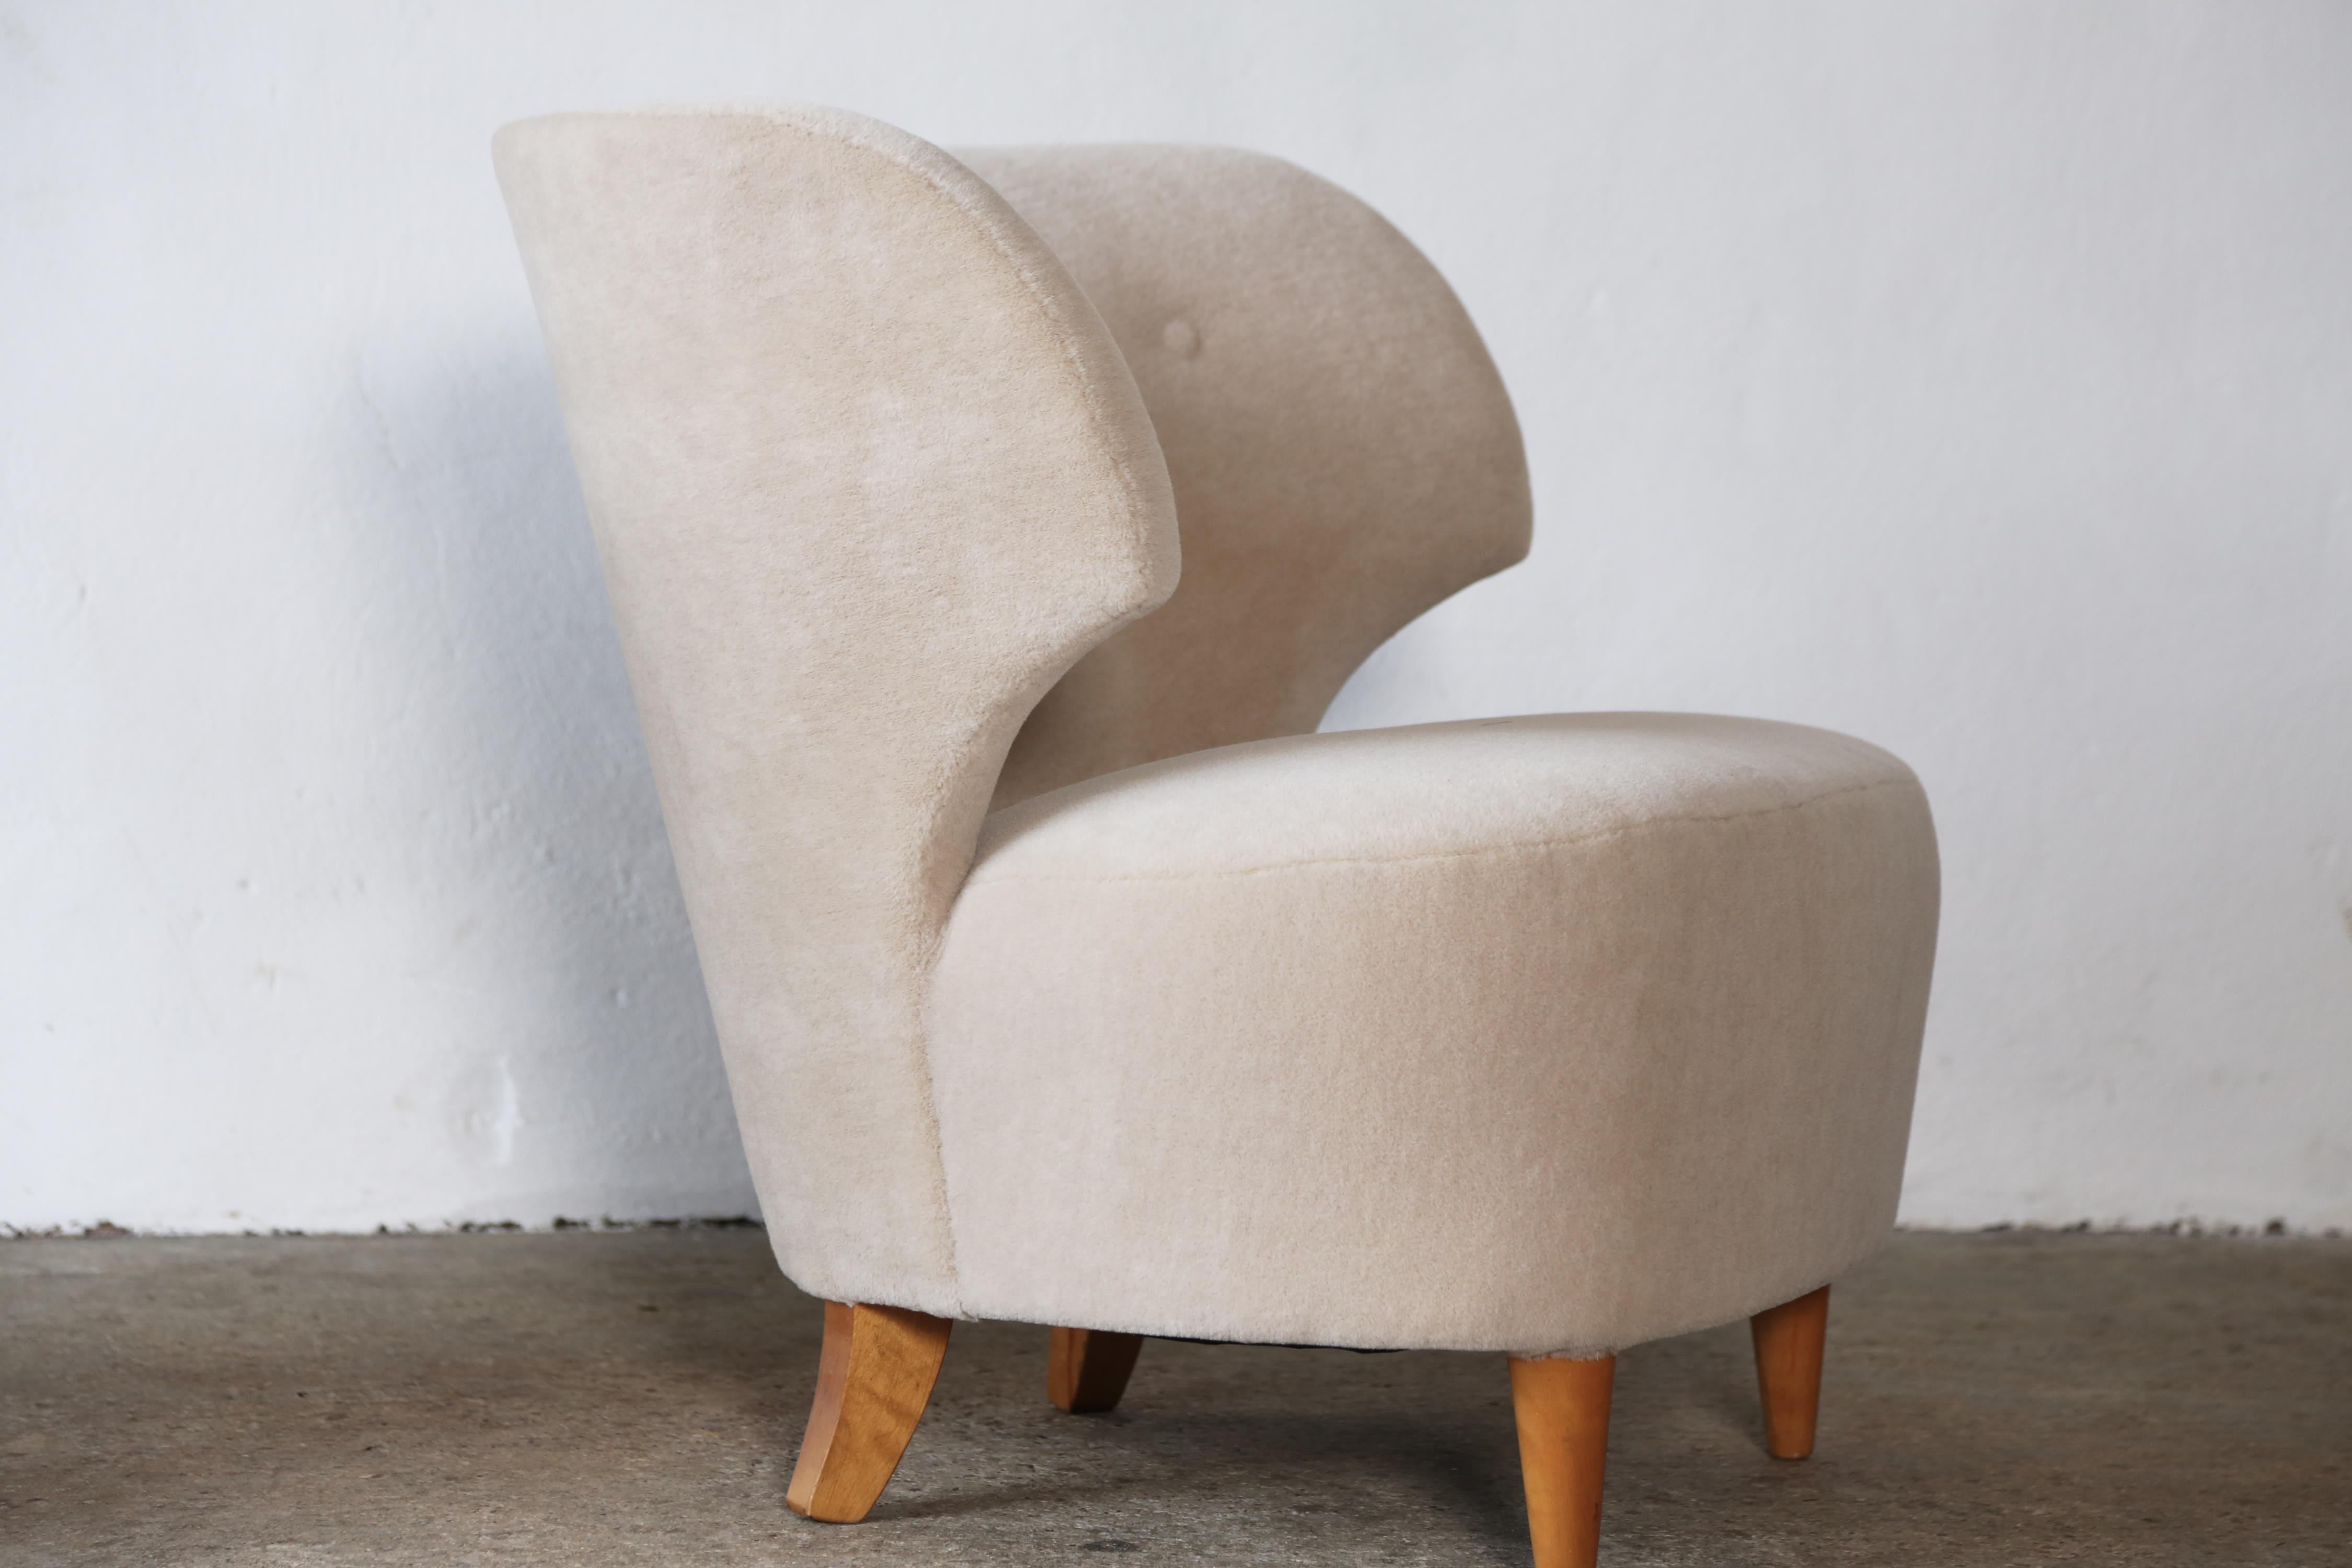 Finnish Pair of Carl-Johan Boman Chairs, Finland, 1940s, Newly Upholstered in Alpaca